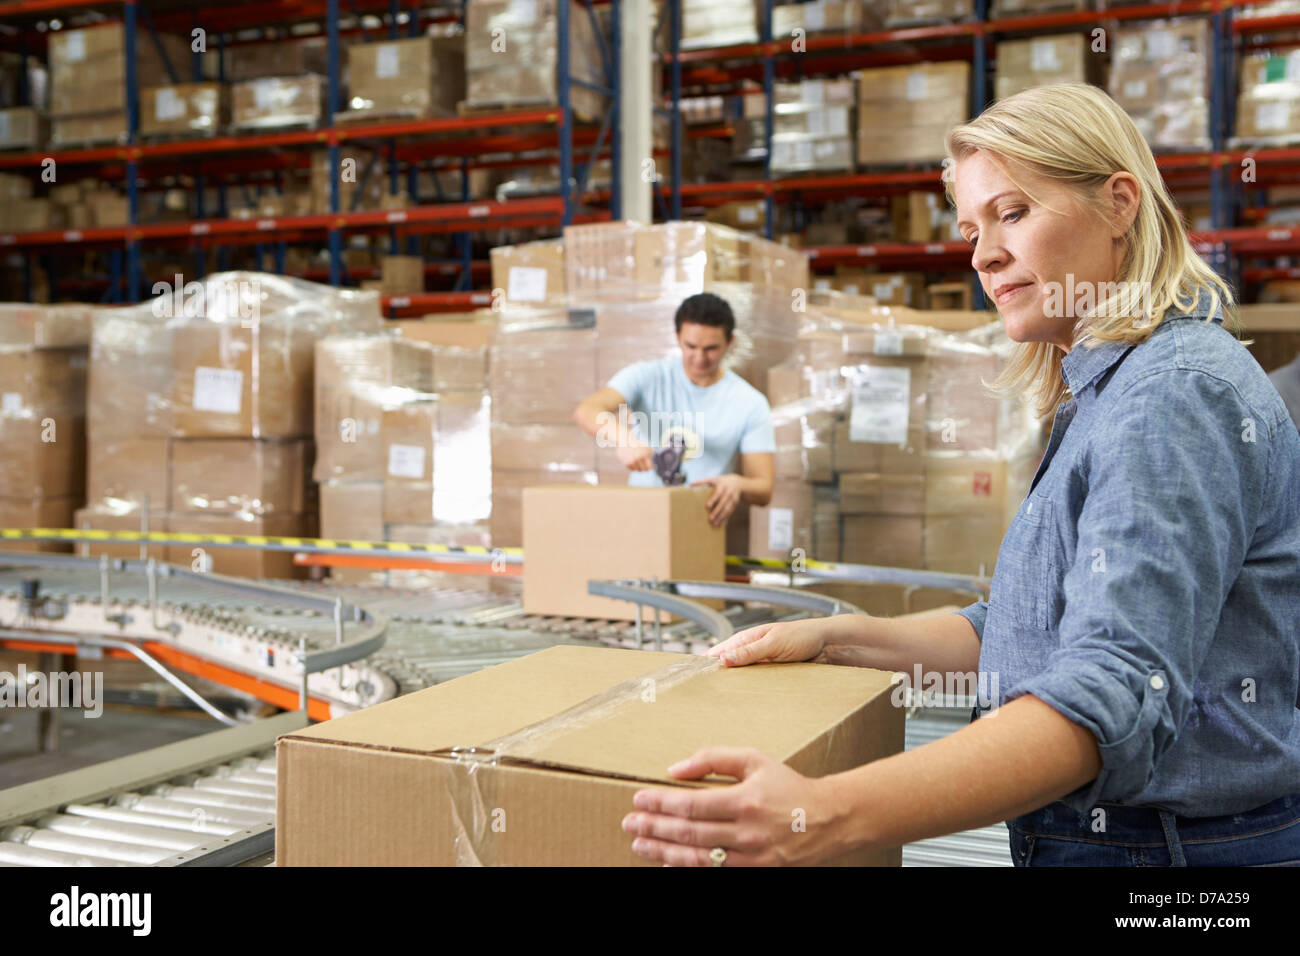 Workers In Distribution Warehouse Stock Photo